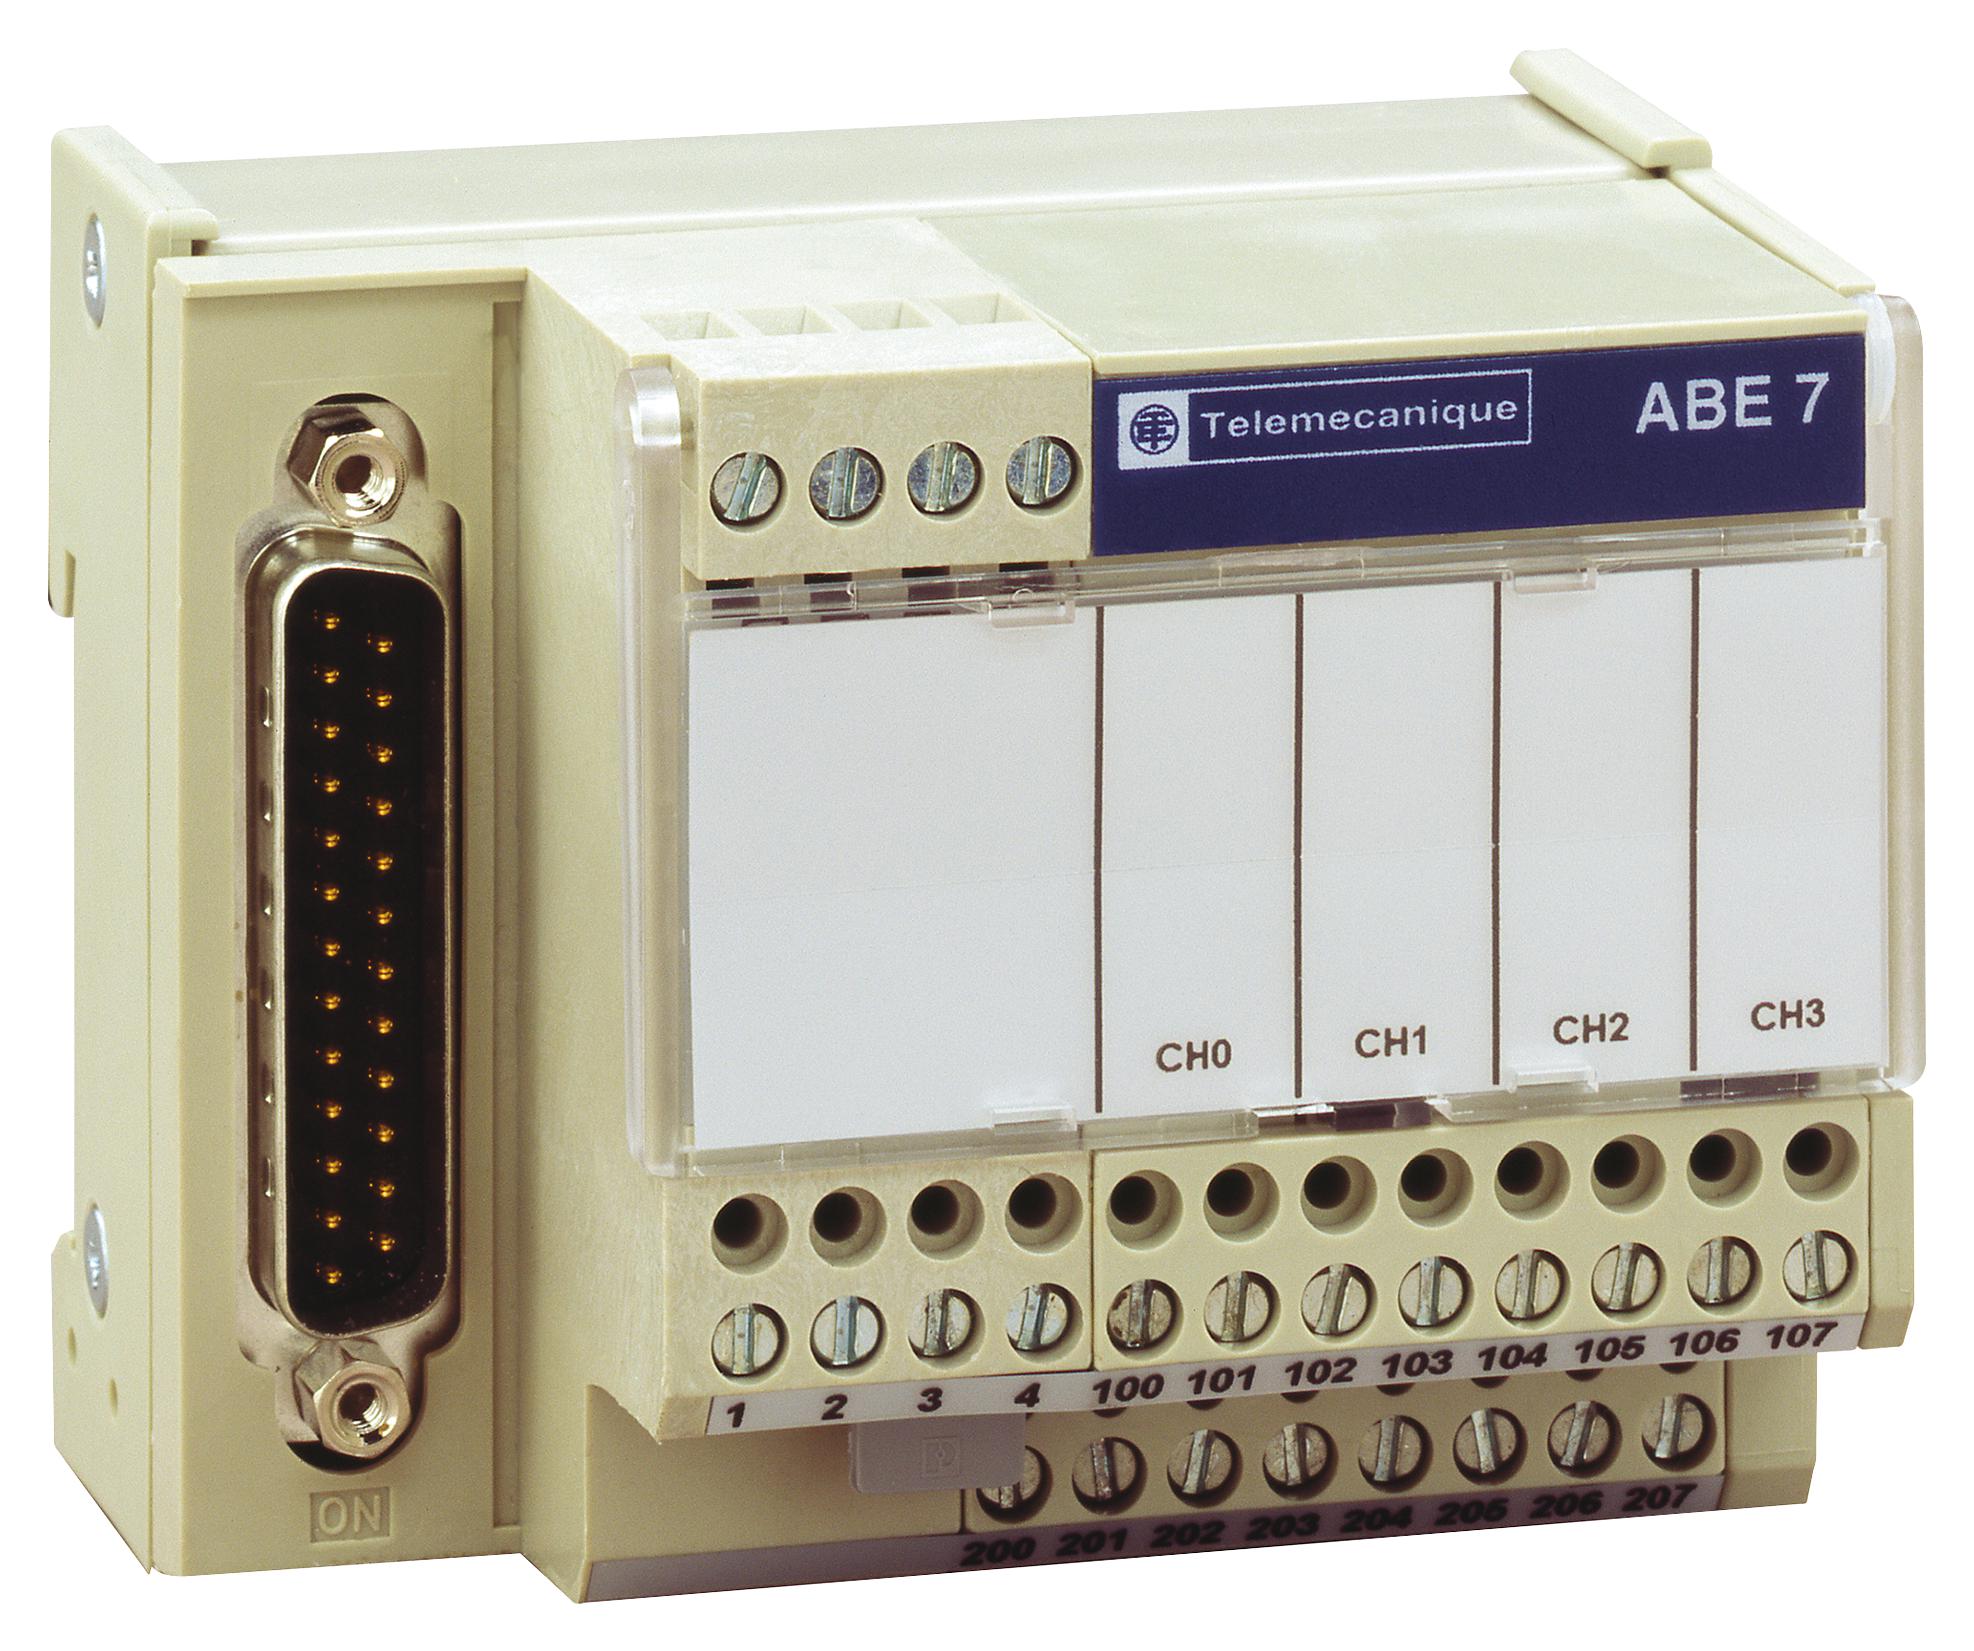 ABE7CPA410 CONNECTION SUB BASE, 4 CH SCHNEIDER ELECTRIC